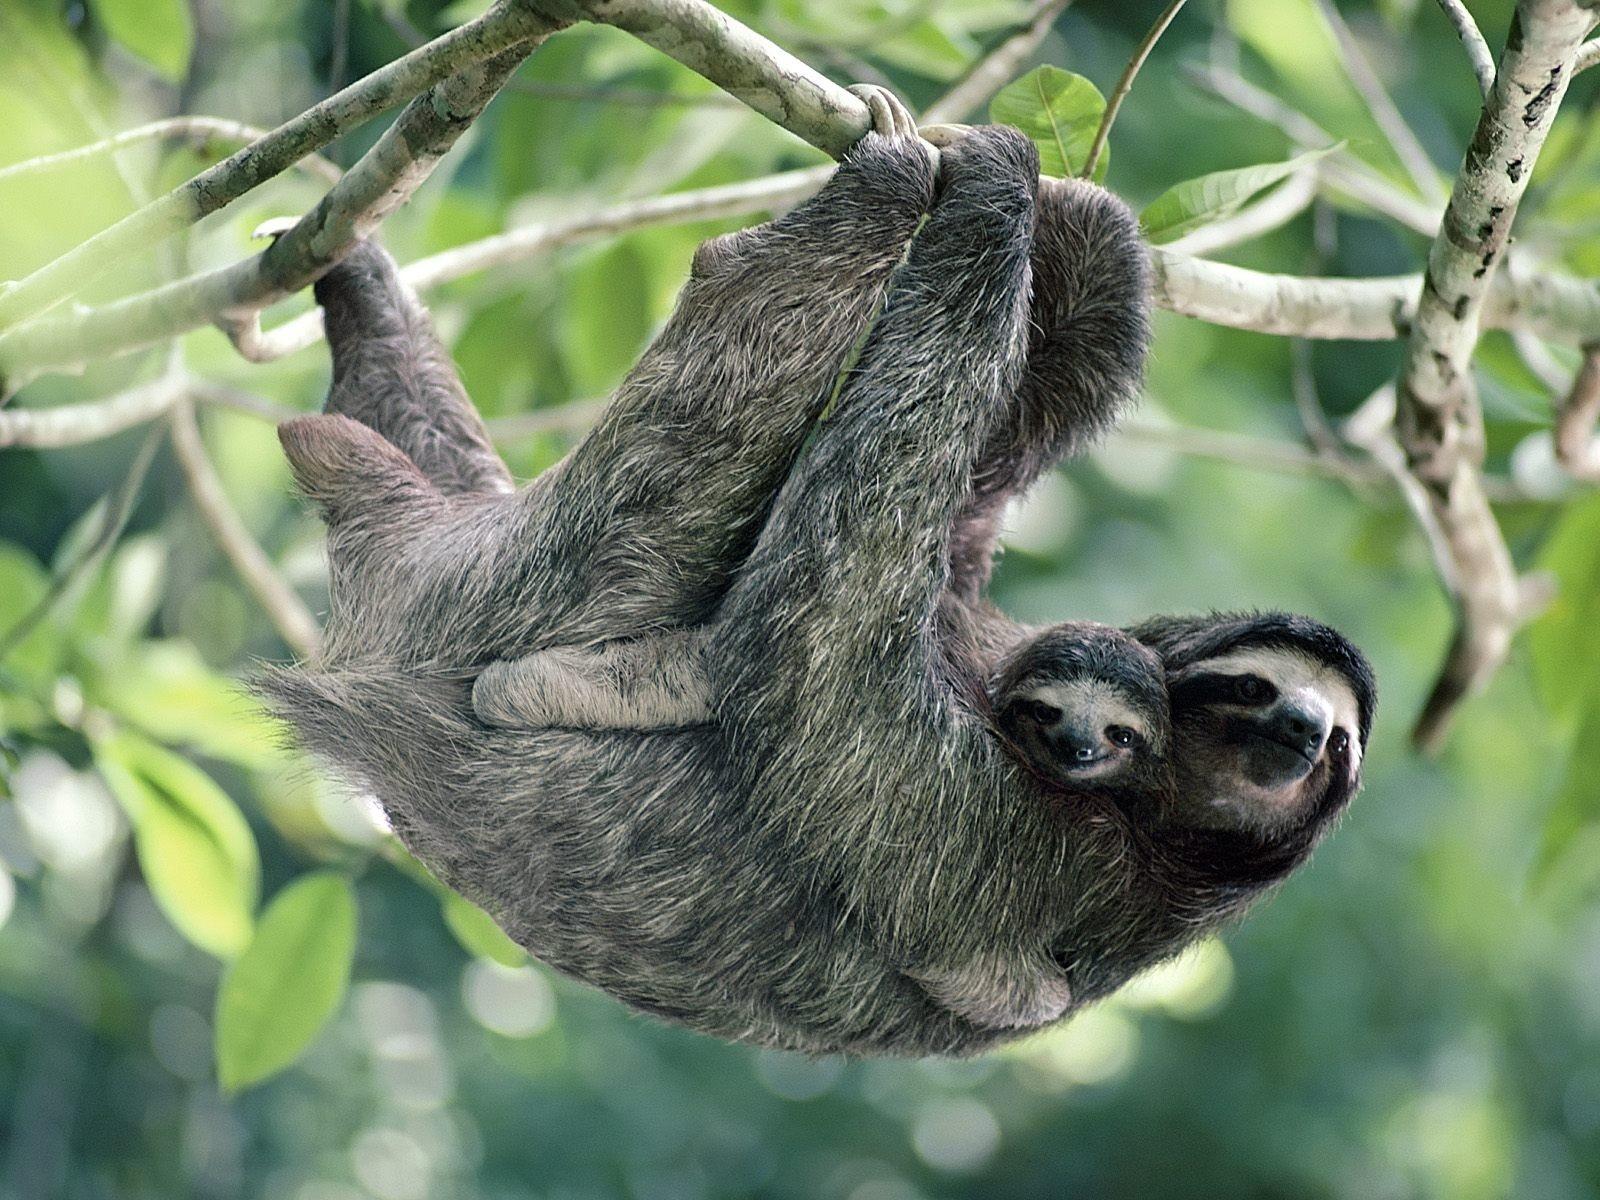 Download Wallpapers, Download 1600x1200 nature animals sloth baby